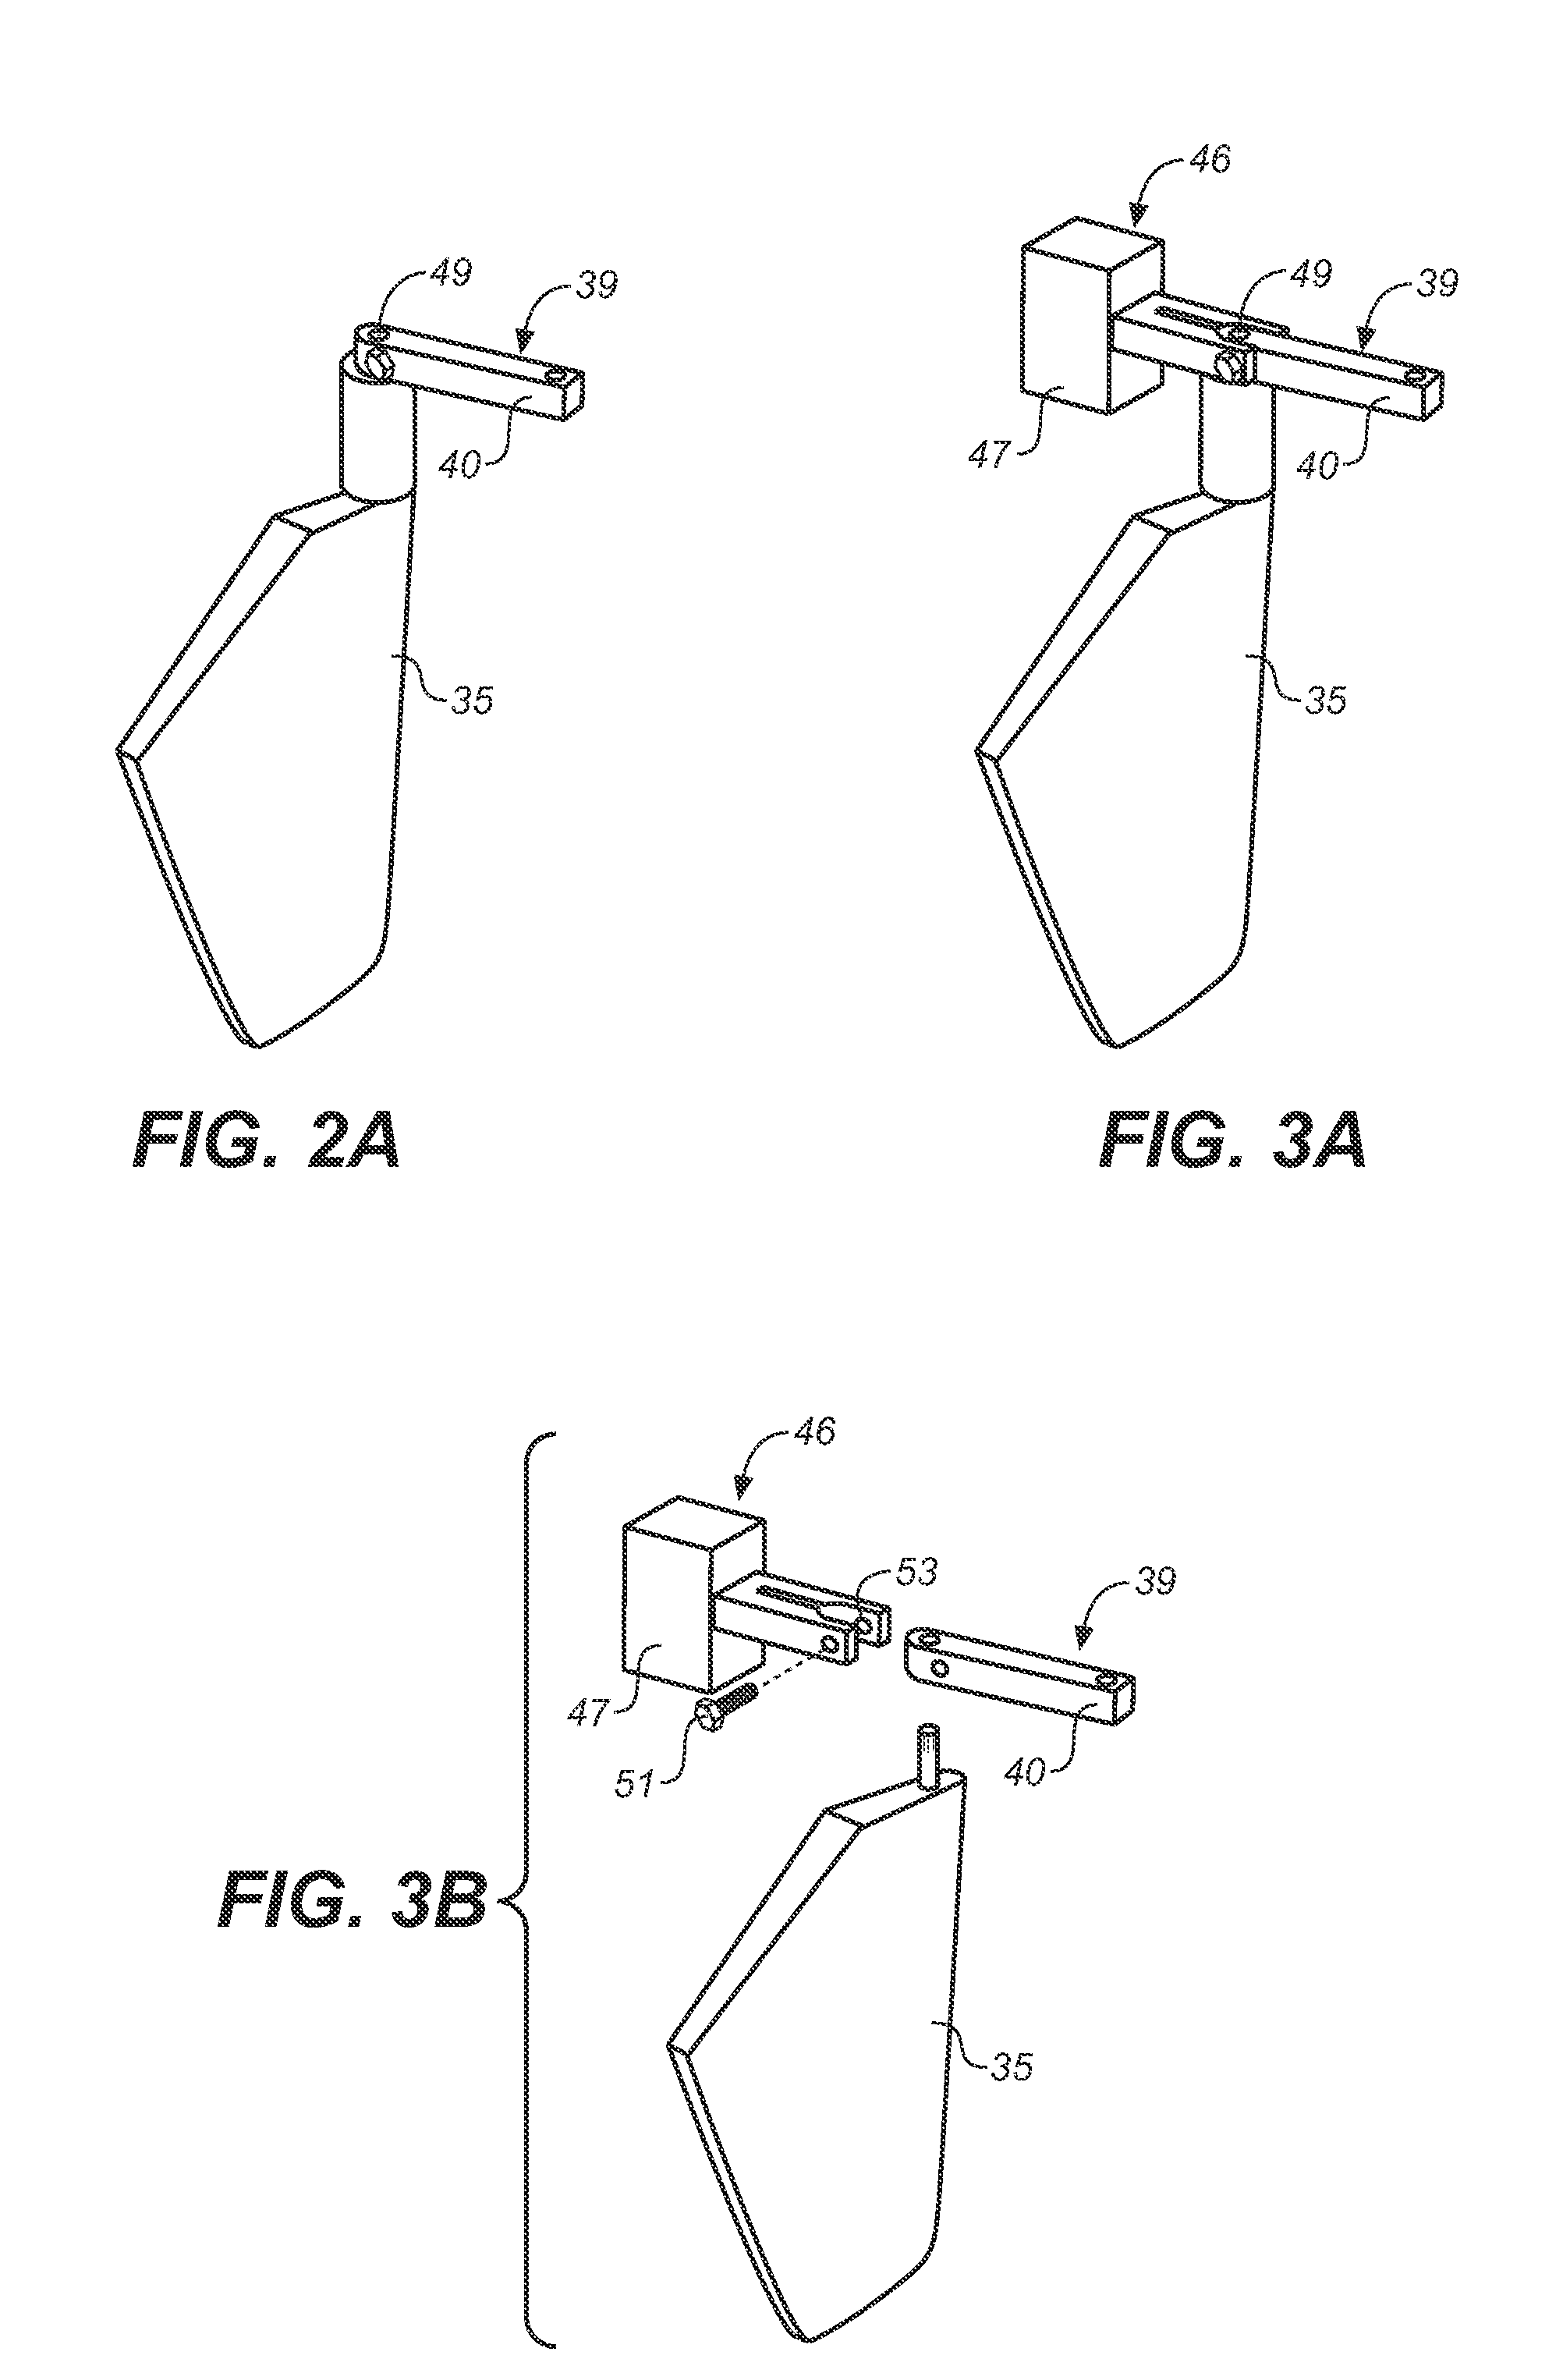 Method and apparatus for dampening rudder vibration